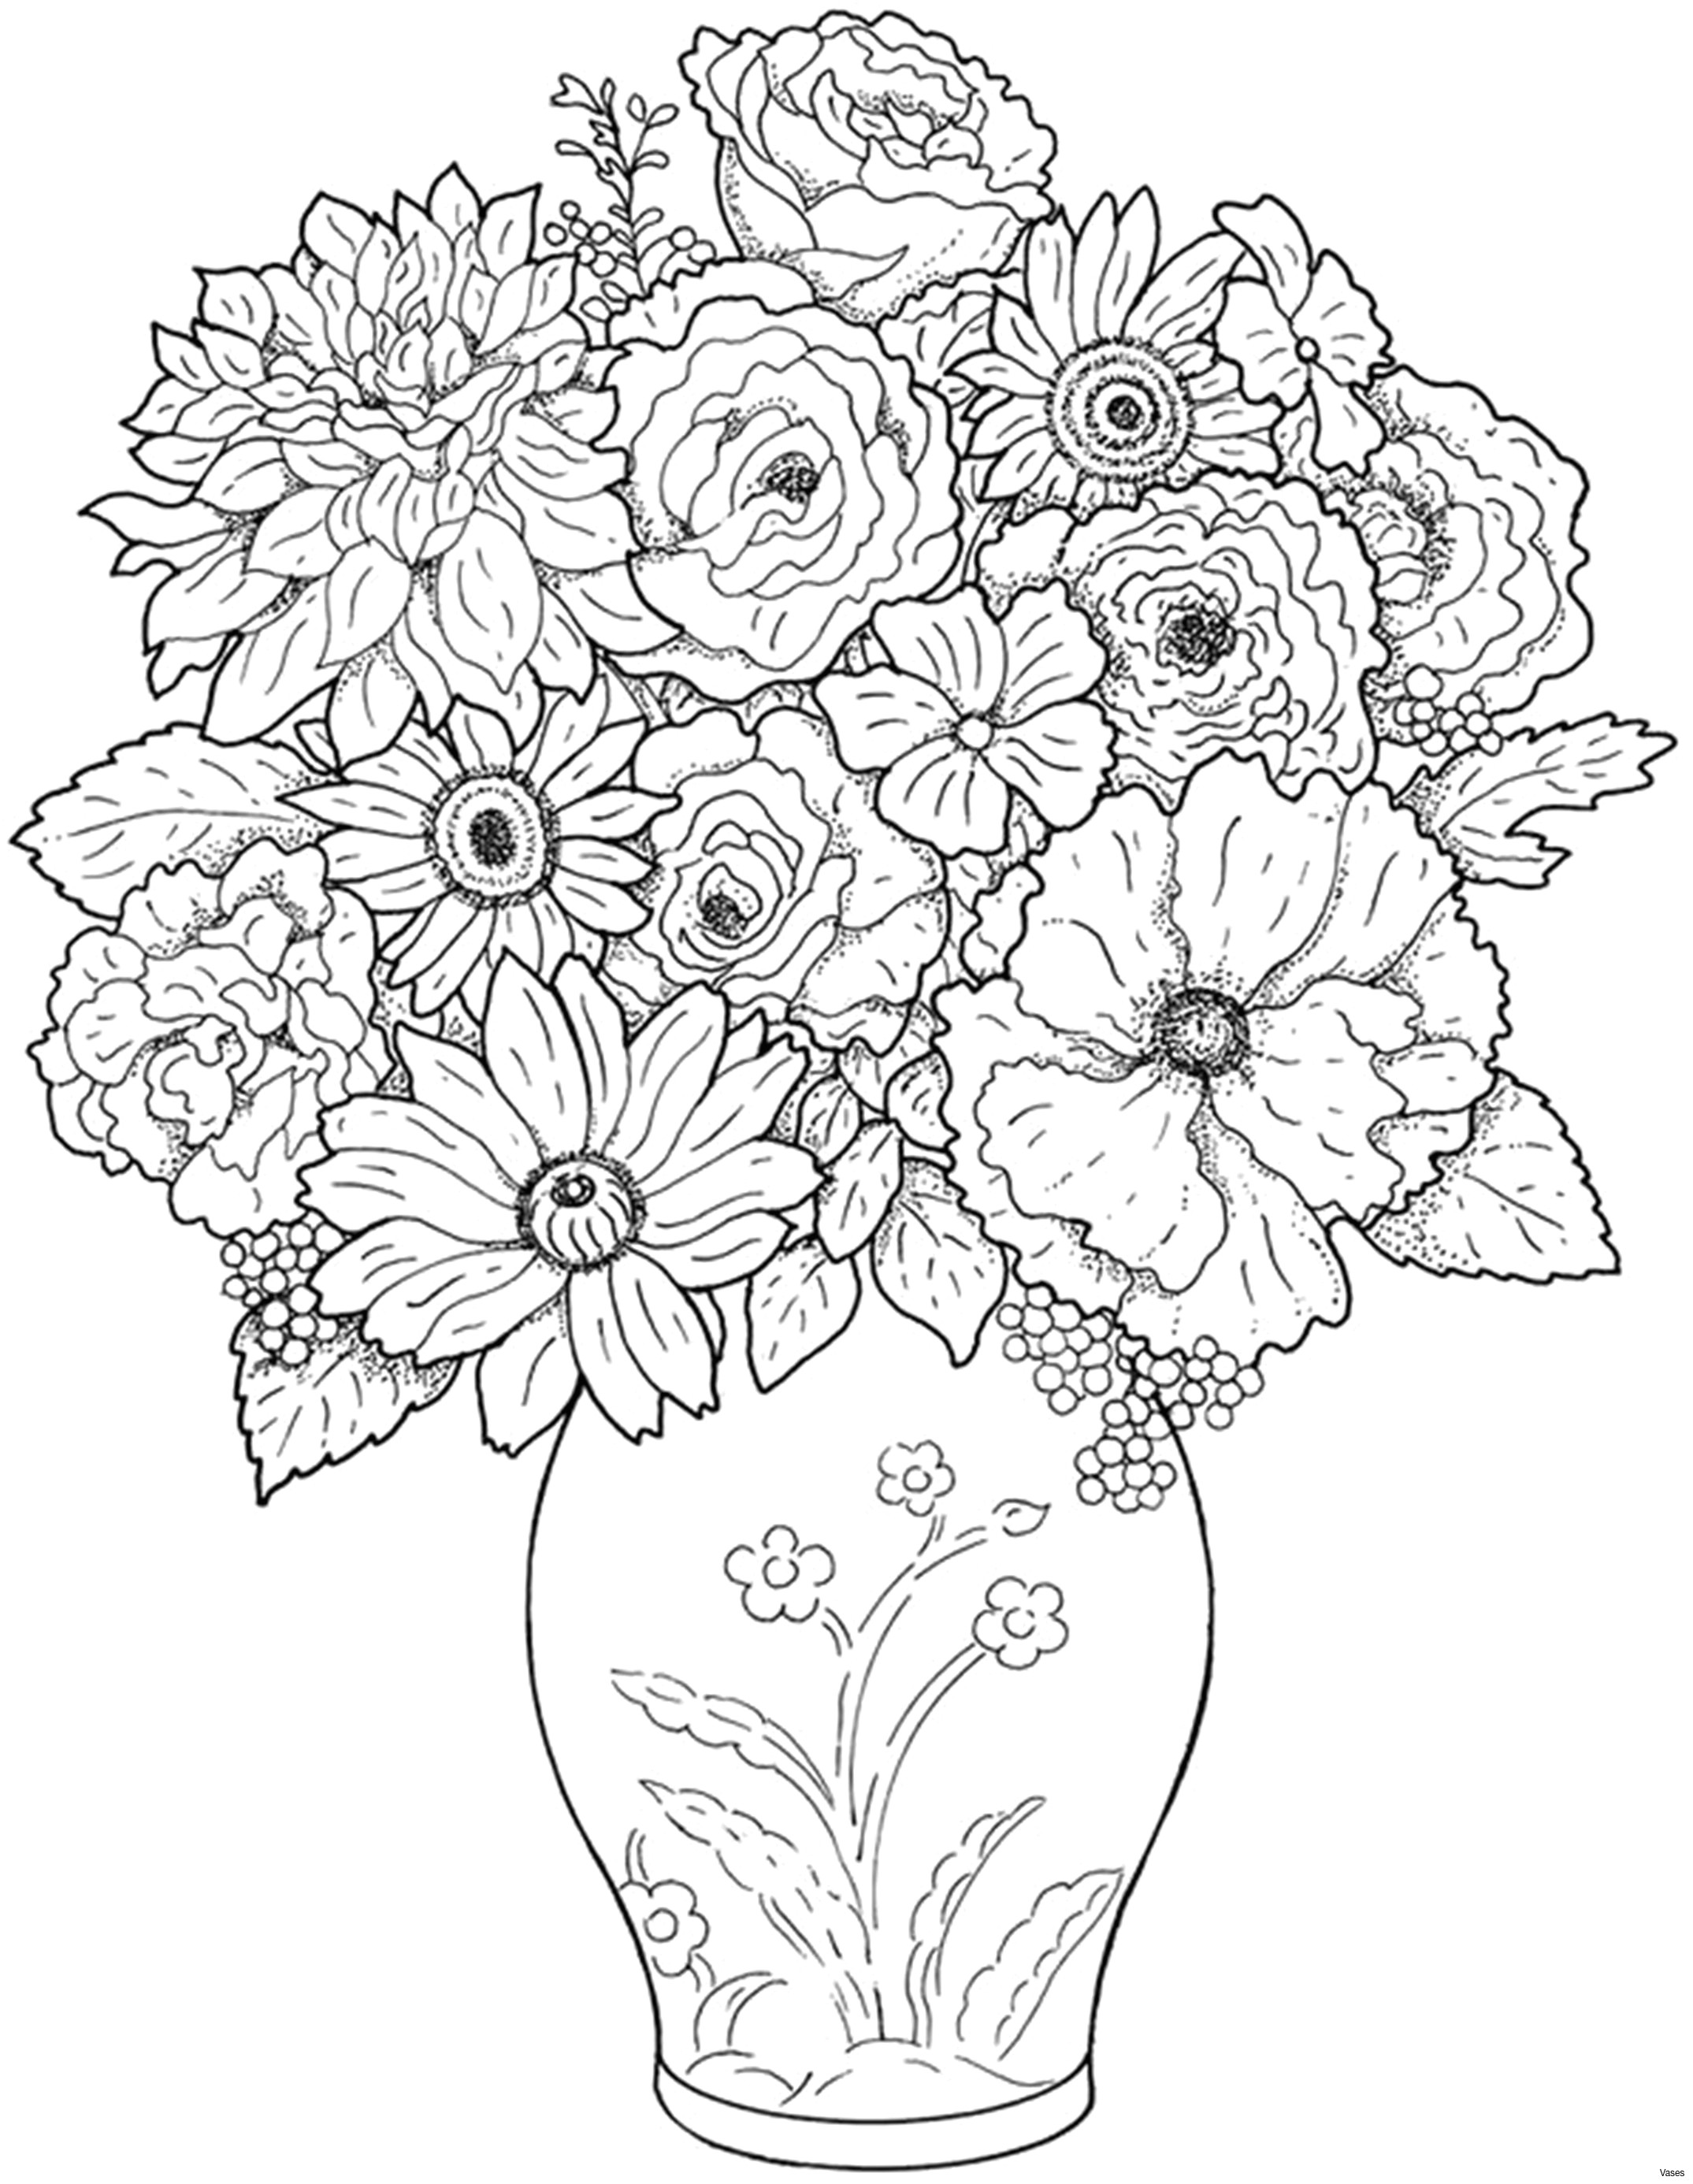 Drawings Of Flower Plants Coloring Pictures Of Plants New Cool Vases Flower Vase Coloring Page